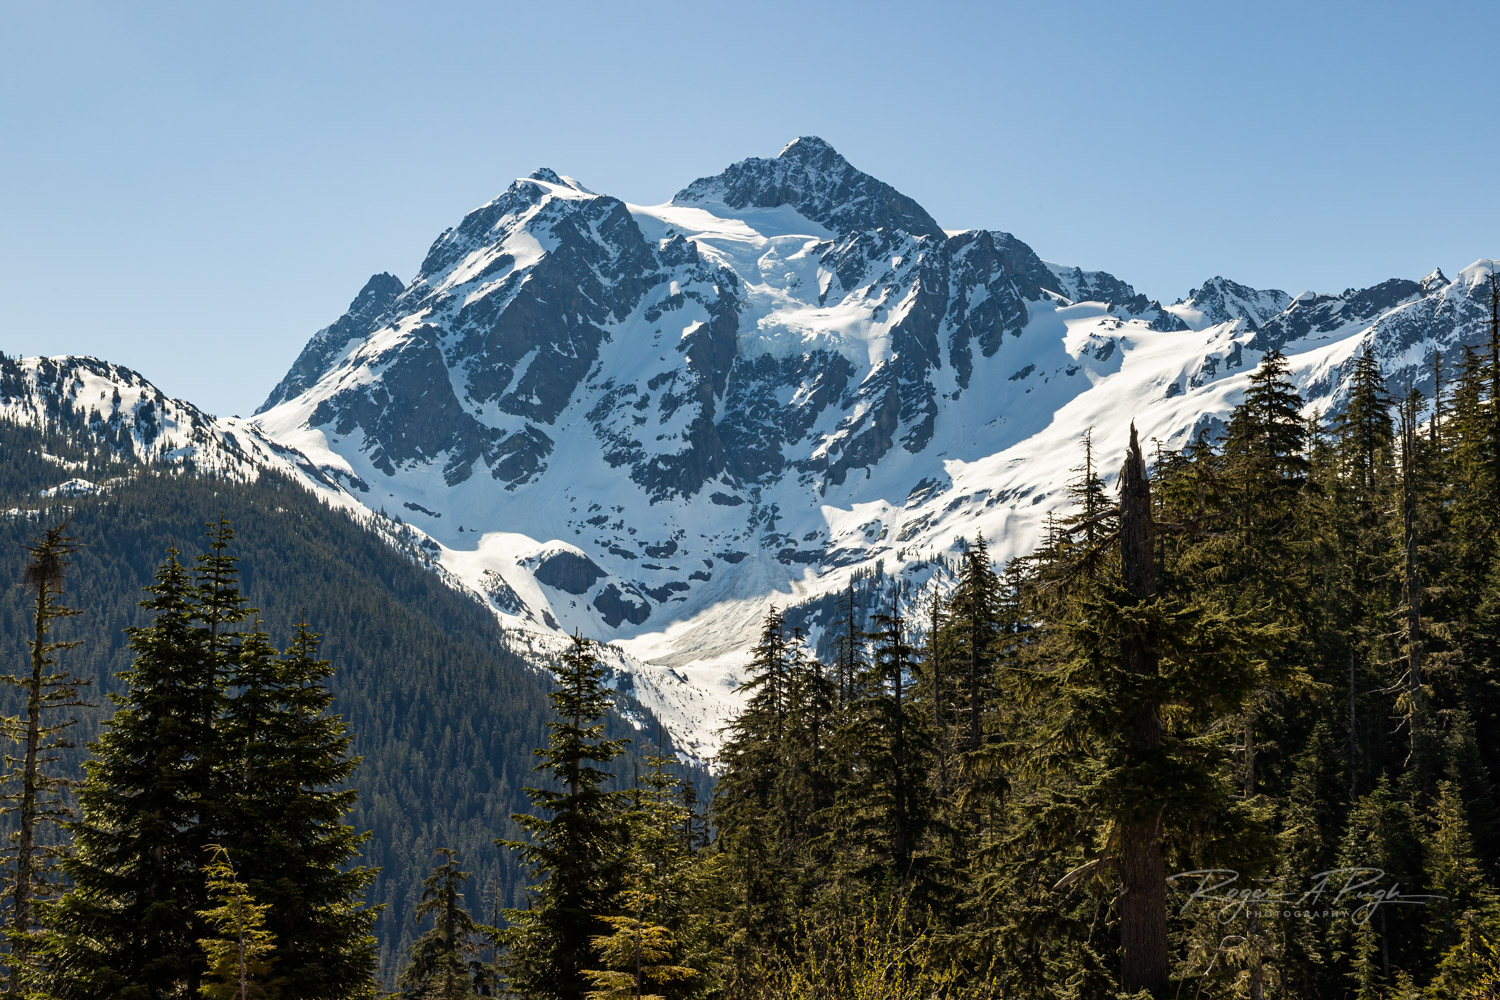 Probably the most photographed mountain in the world, at least for calendars, Mt Shuksan.